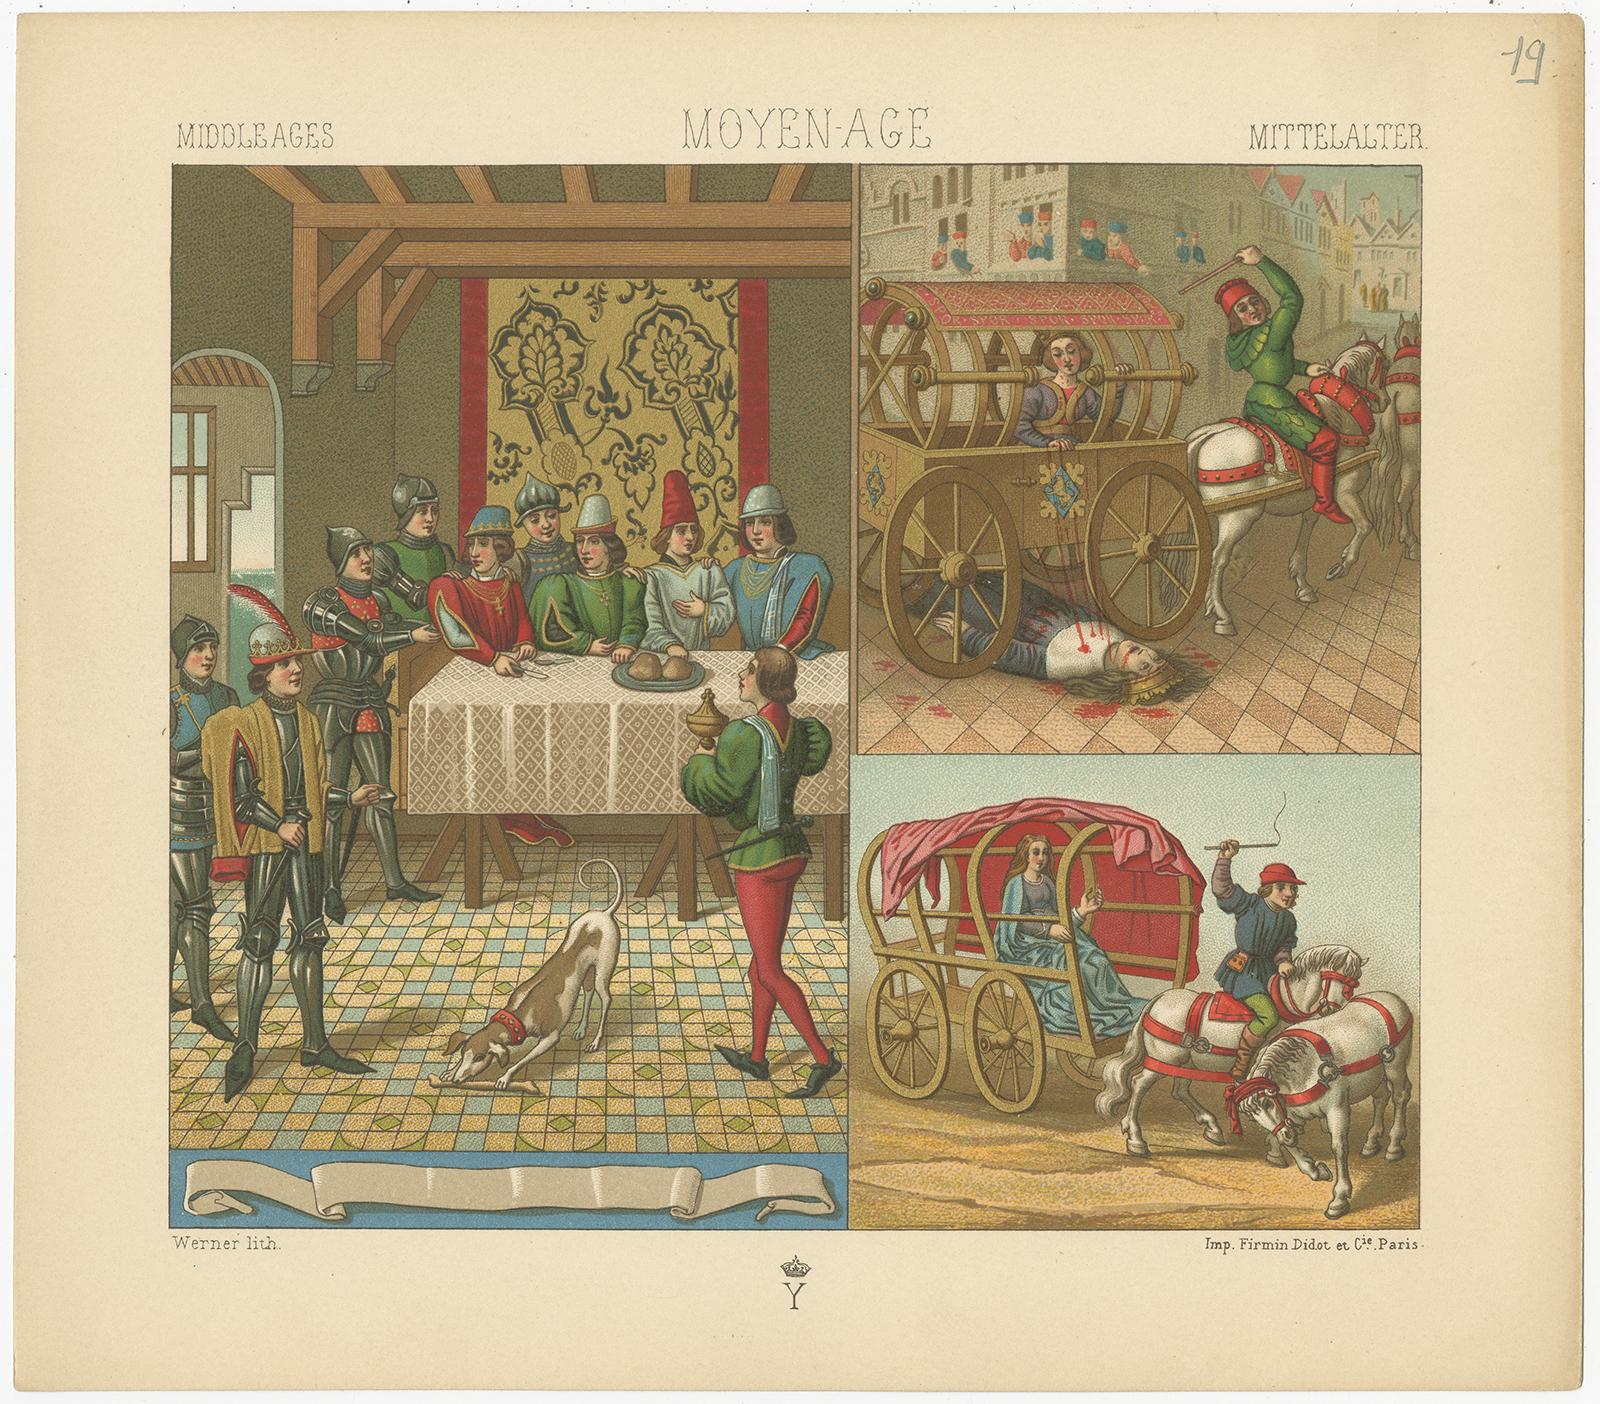 Antique print titled 'Middle Ages - Moyen Age - Mittelalter'. Chromolithograph of Middle Ages Scenes'. This print originates from 'Le Costume Historique' by M.A. Racinet. Published circa 1880.